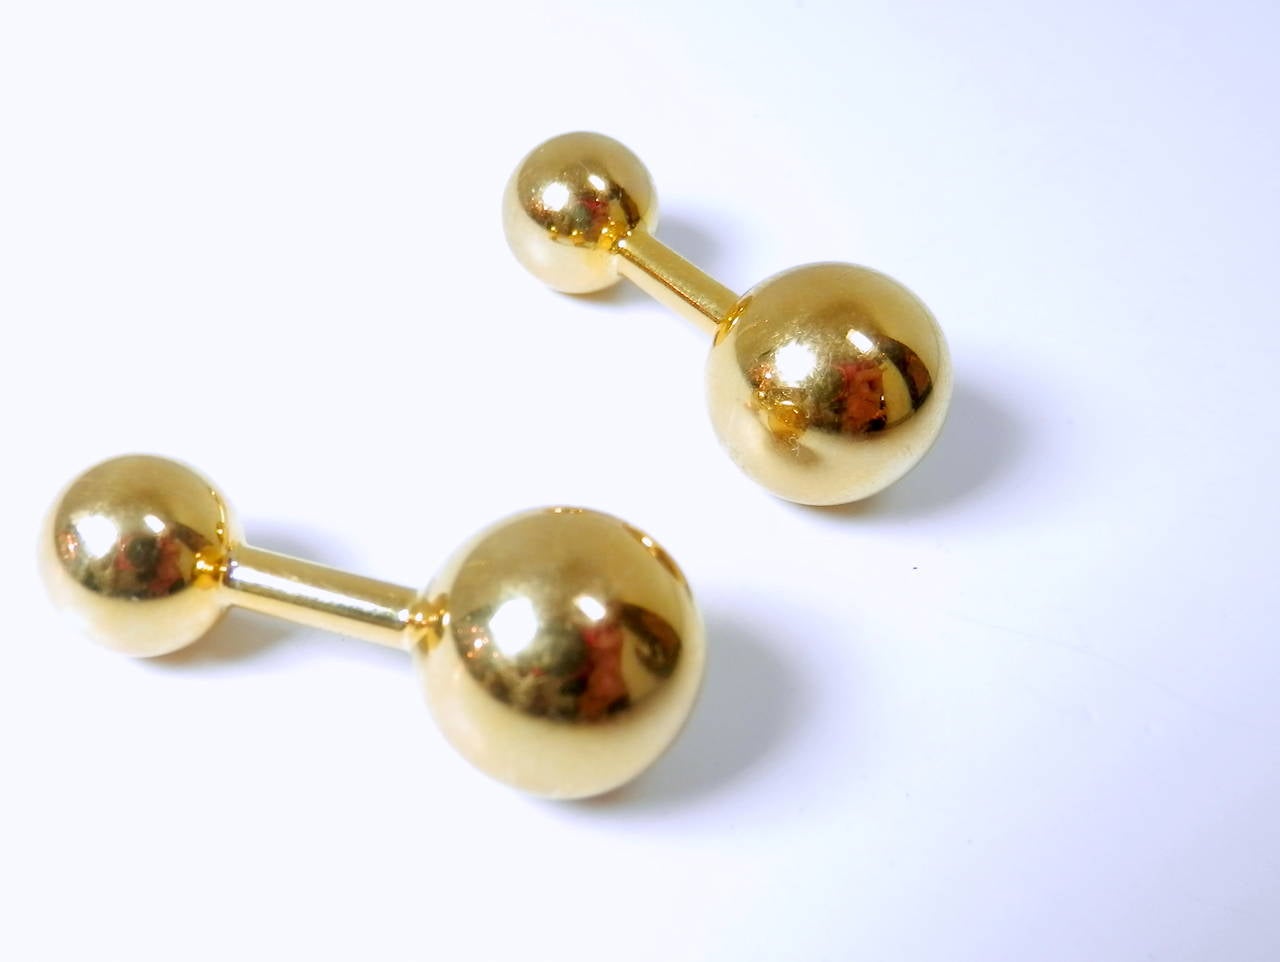 14K yellow gold uneven barbells by Cartier, c. 1949